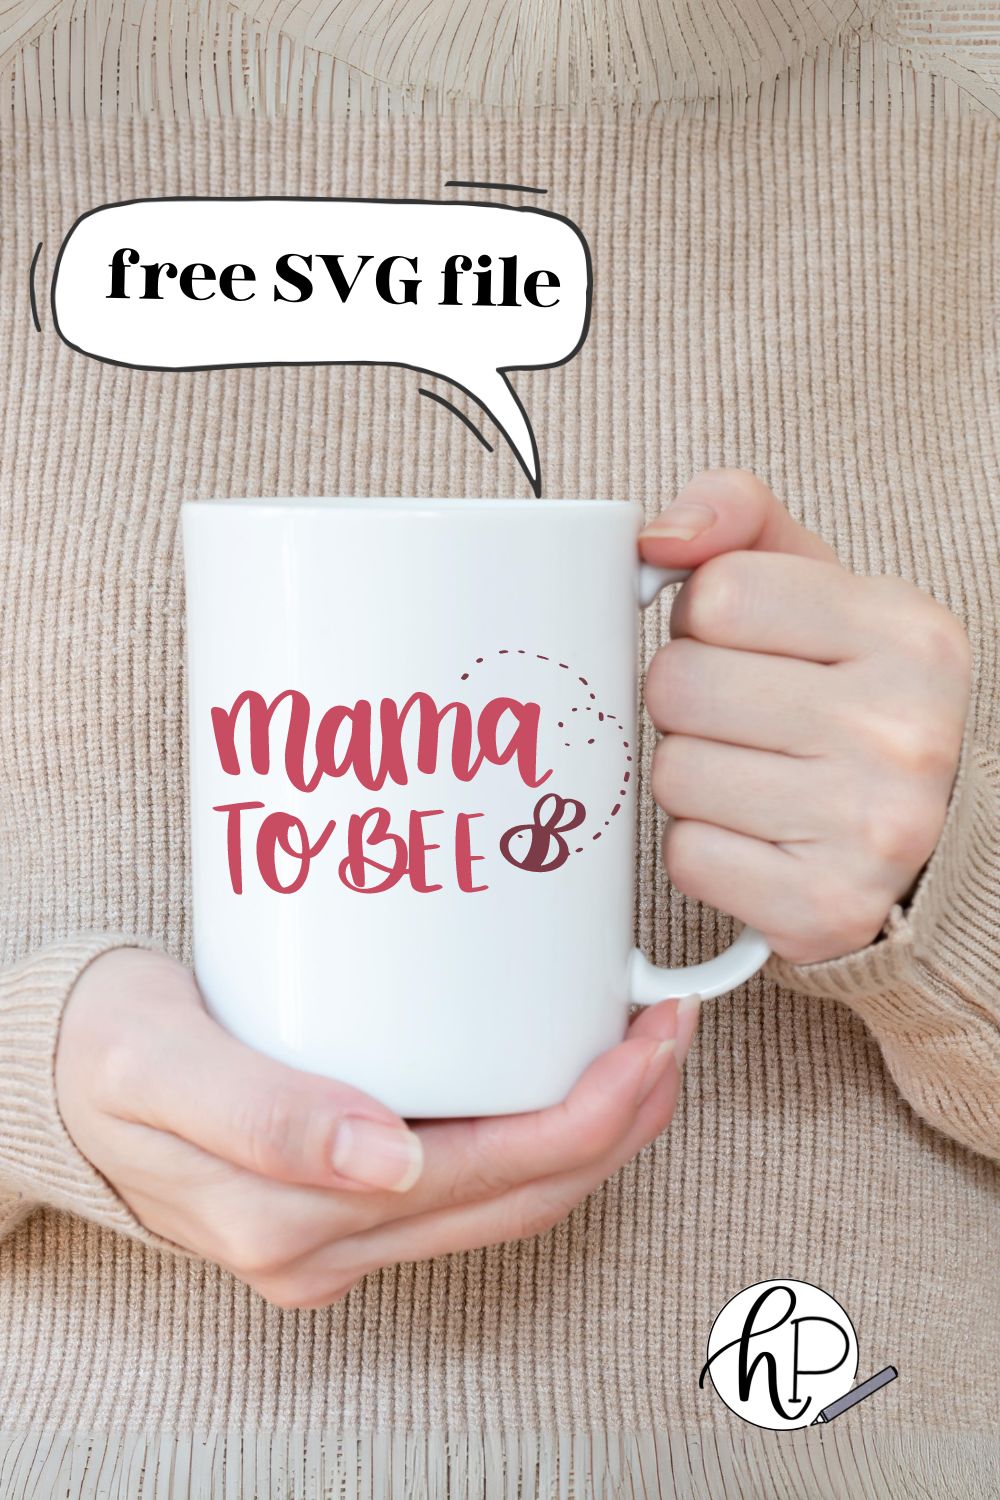 Free SVG file in text bubble above mug with 'mama to bee' hand lettered SVG design applied to mug- design features a hand drawn bee. mug being held by woman's hand